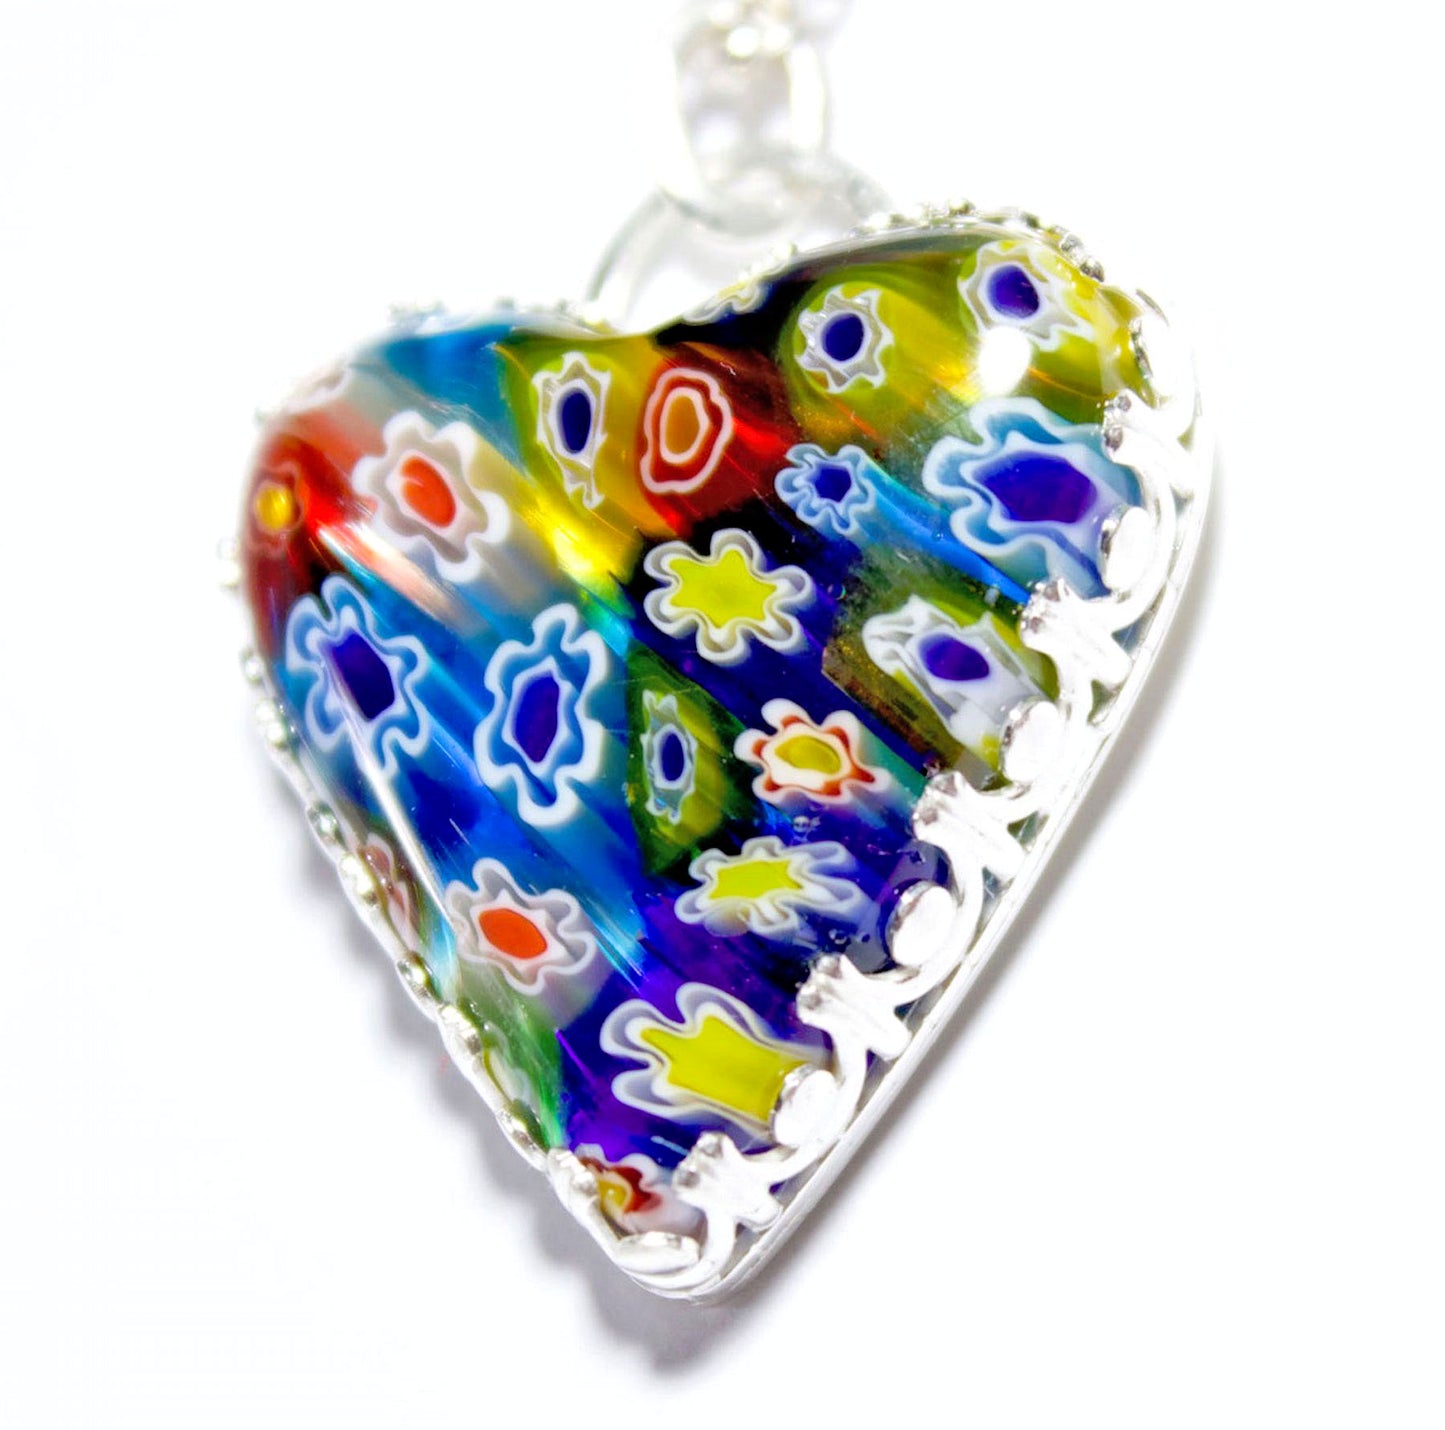 Heart shaped pendant made of millifiore glass. The heart is clear glass filled with glass tubes that are shaped like flowers and go from the front to the back of the heart. Multi color includes red, blue, yellow, and white. Surrounded by a heavy detailed gallery wire.